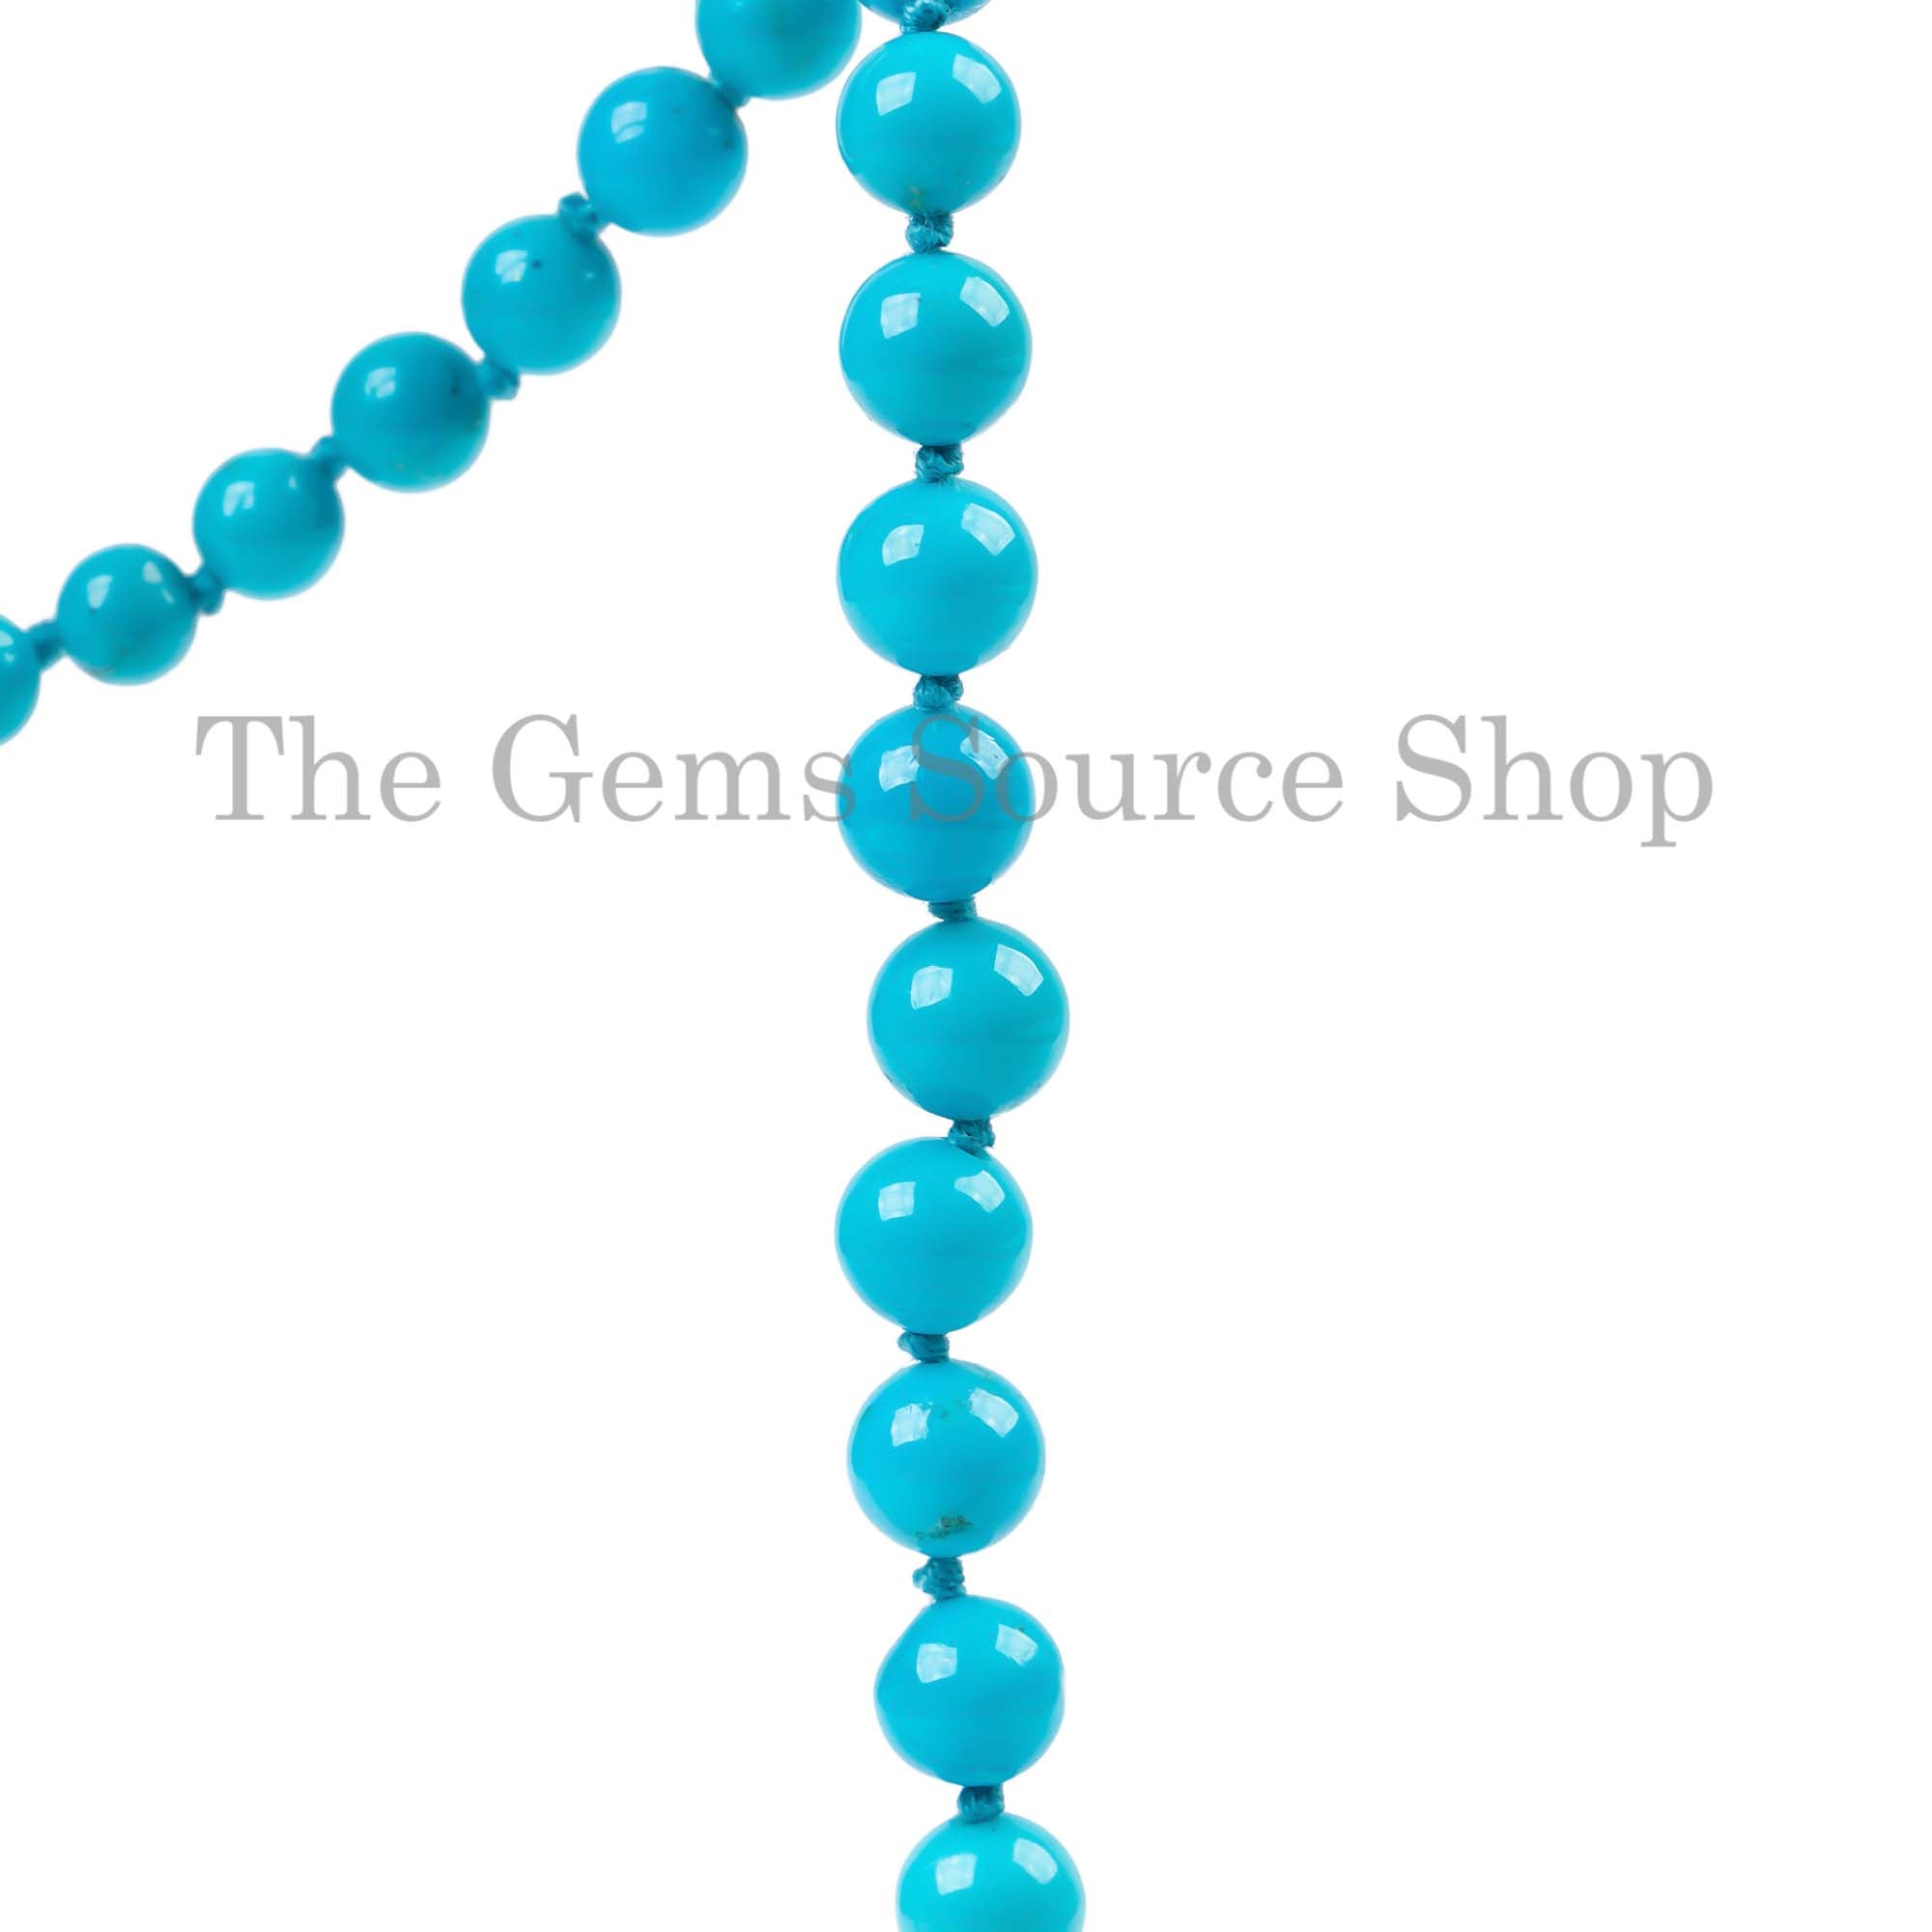 Top Quality Turquoise Plain Round Beads, Smooth Turquoise Round Beads, Turquoise Beads